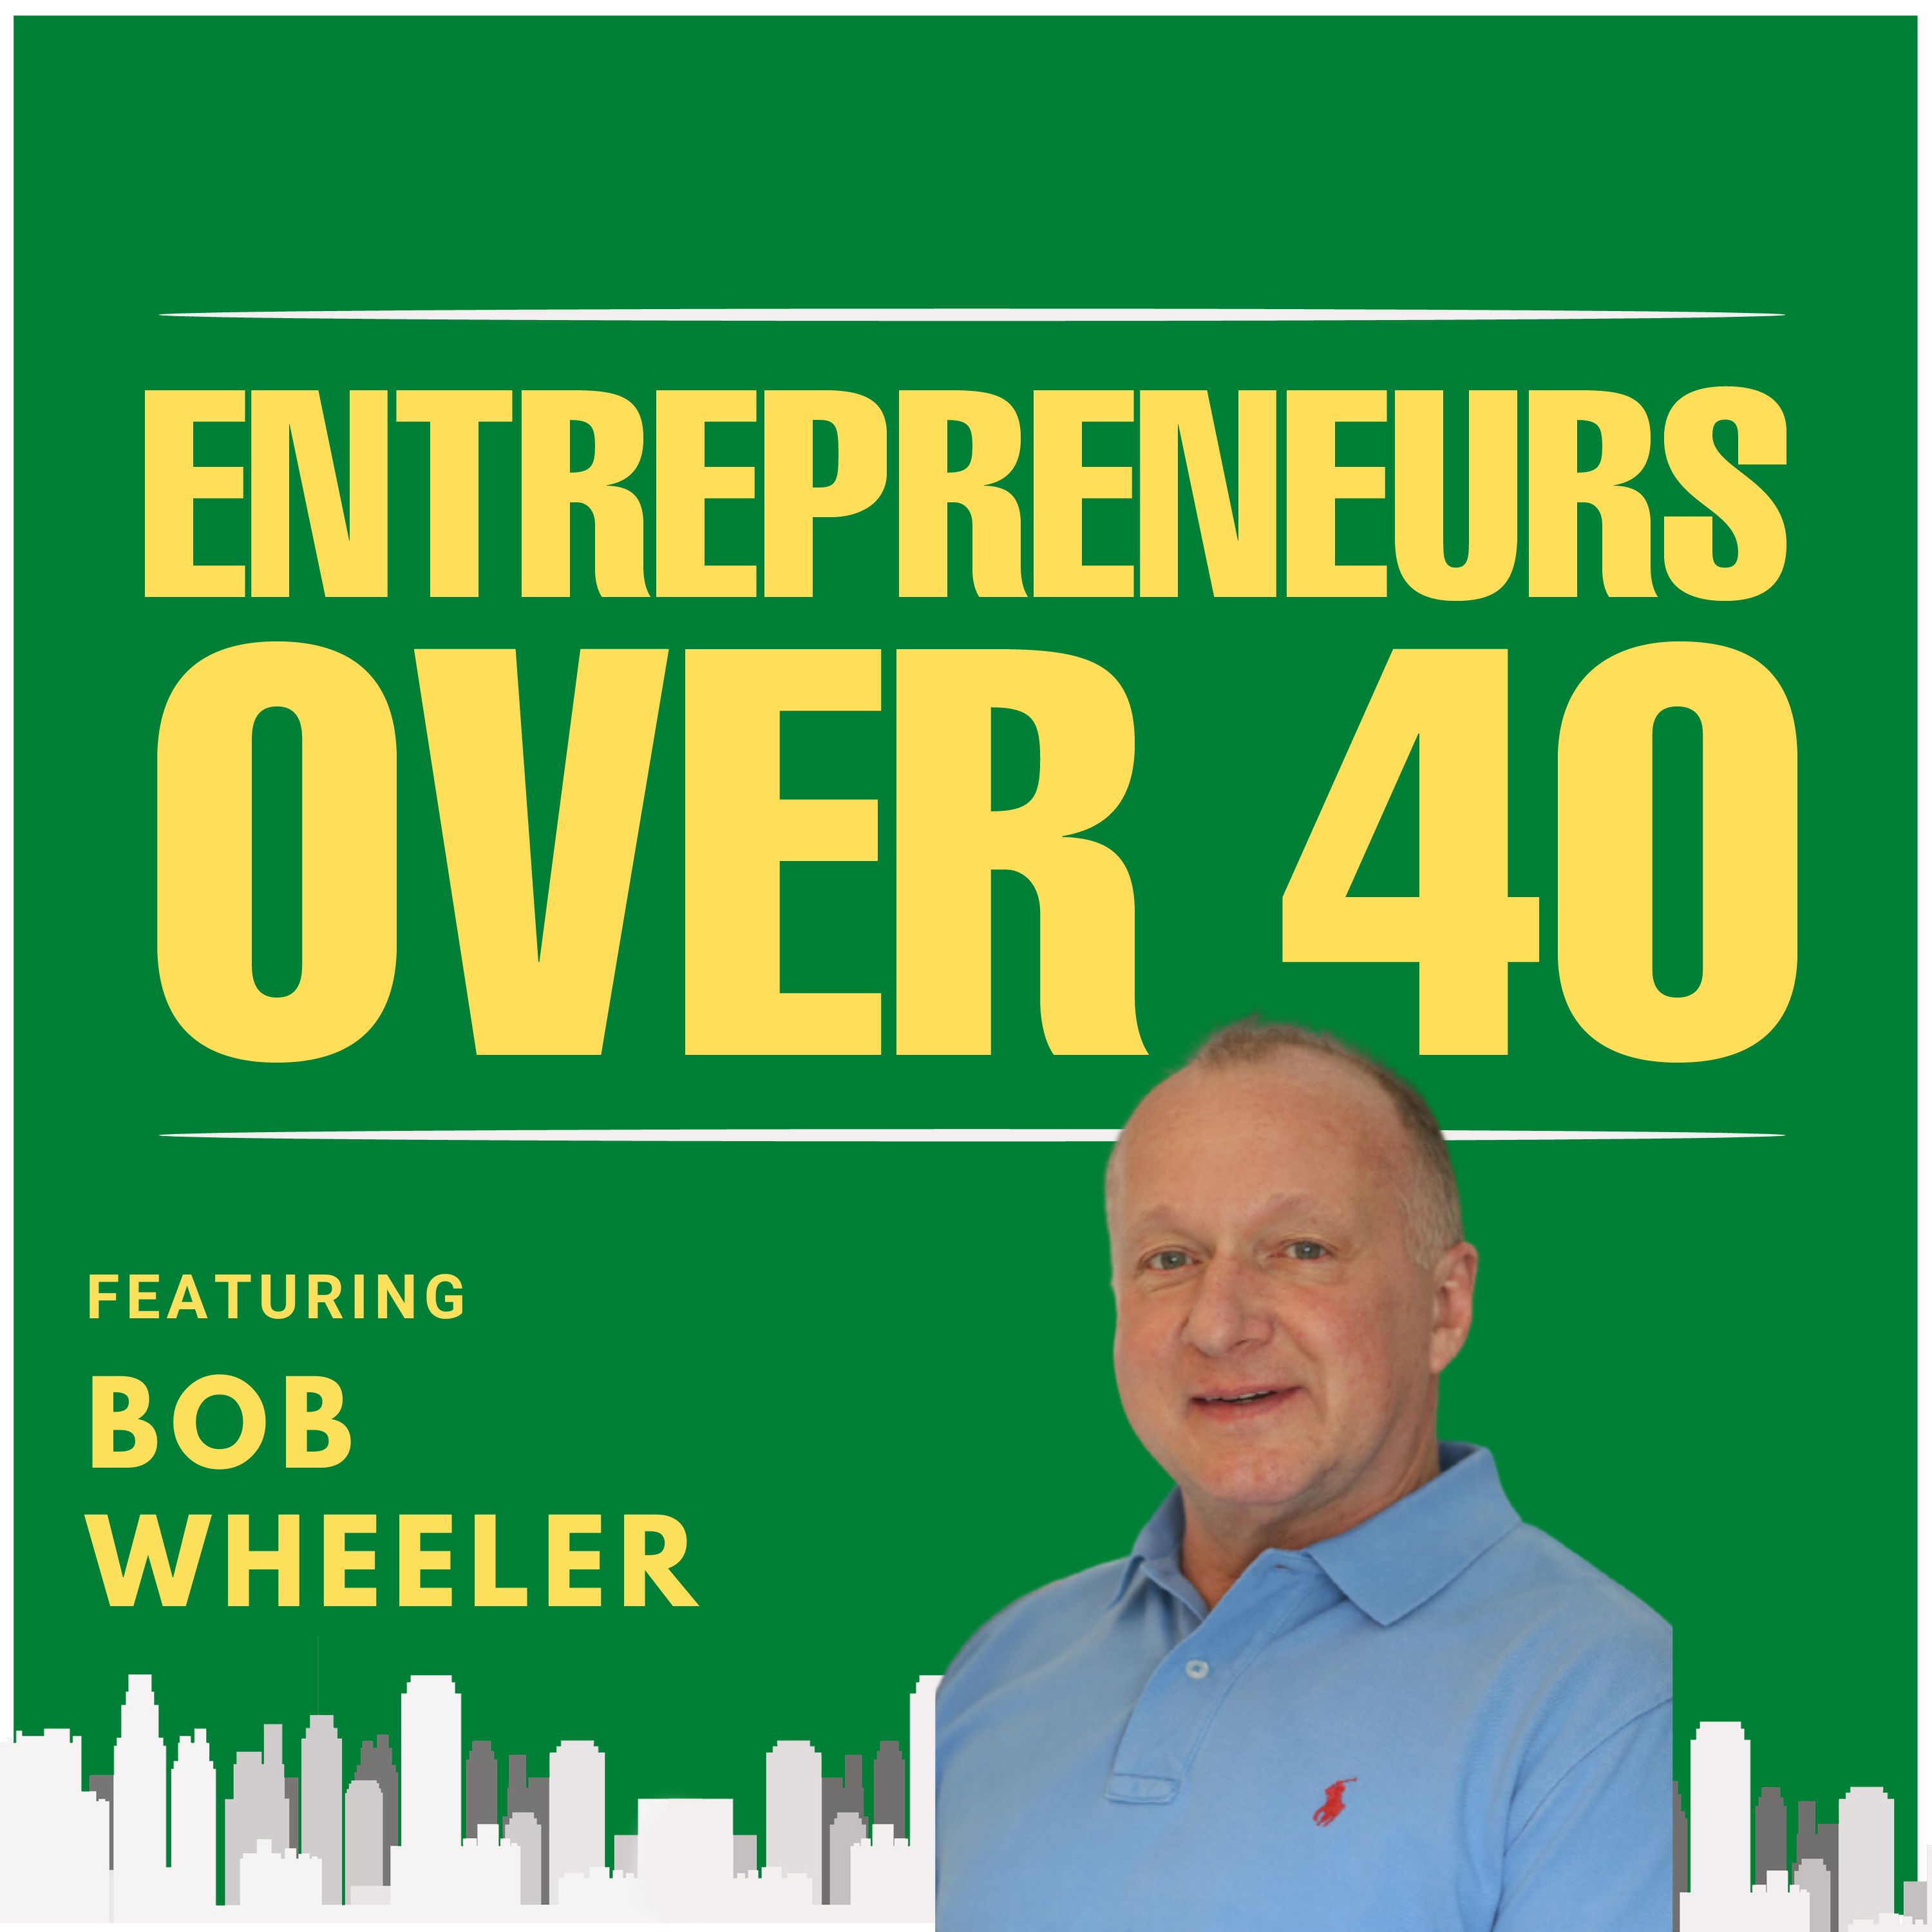 57- Bob Wheeler Talks About Our Relationships With Money And His With Comedy Image